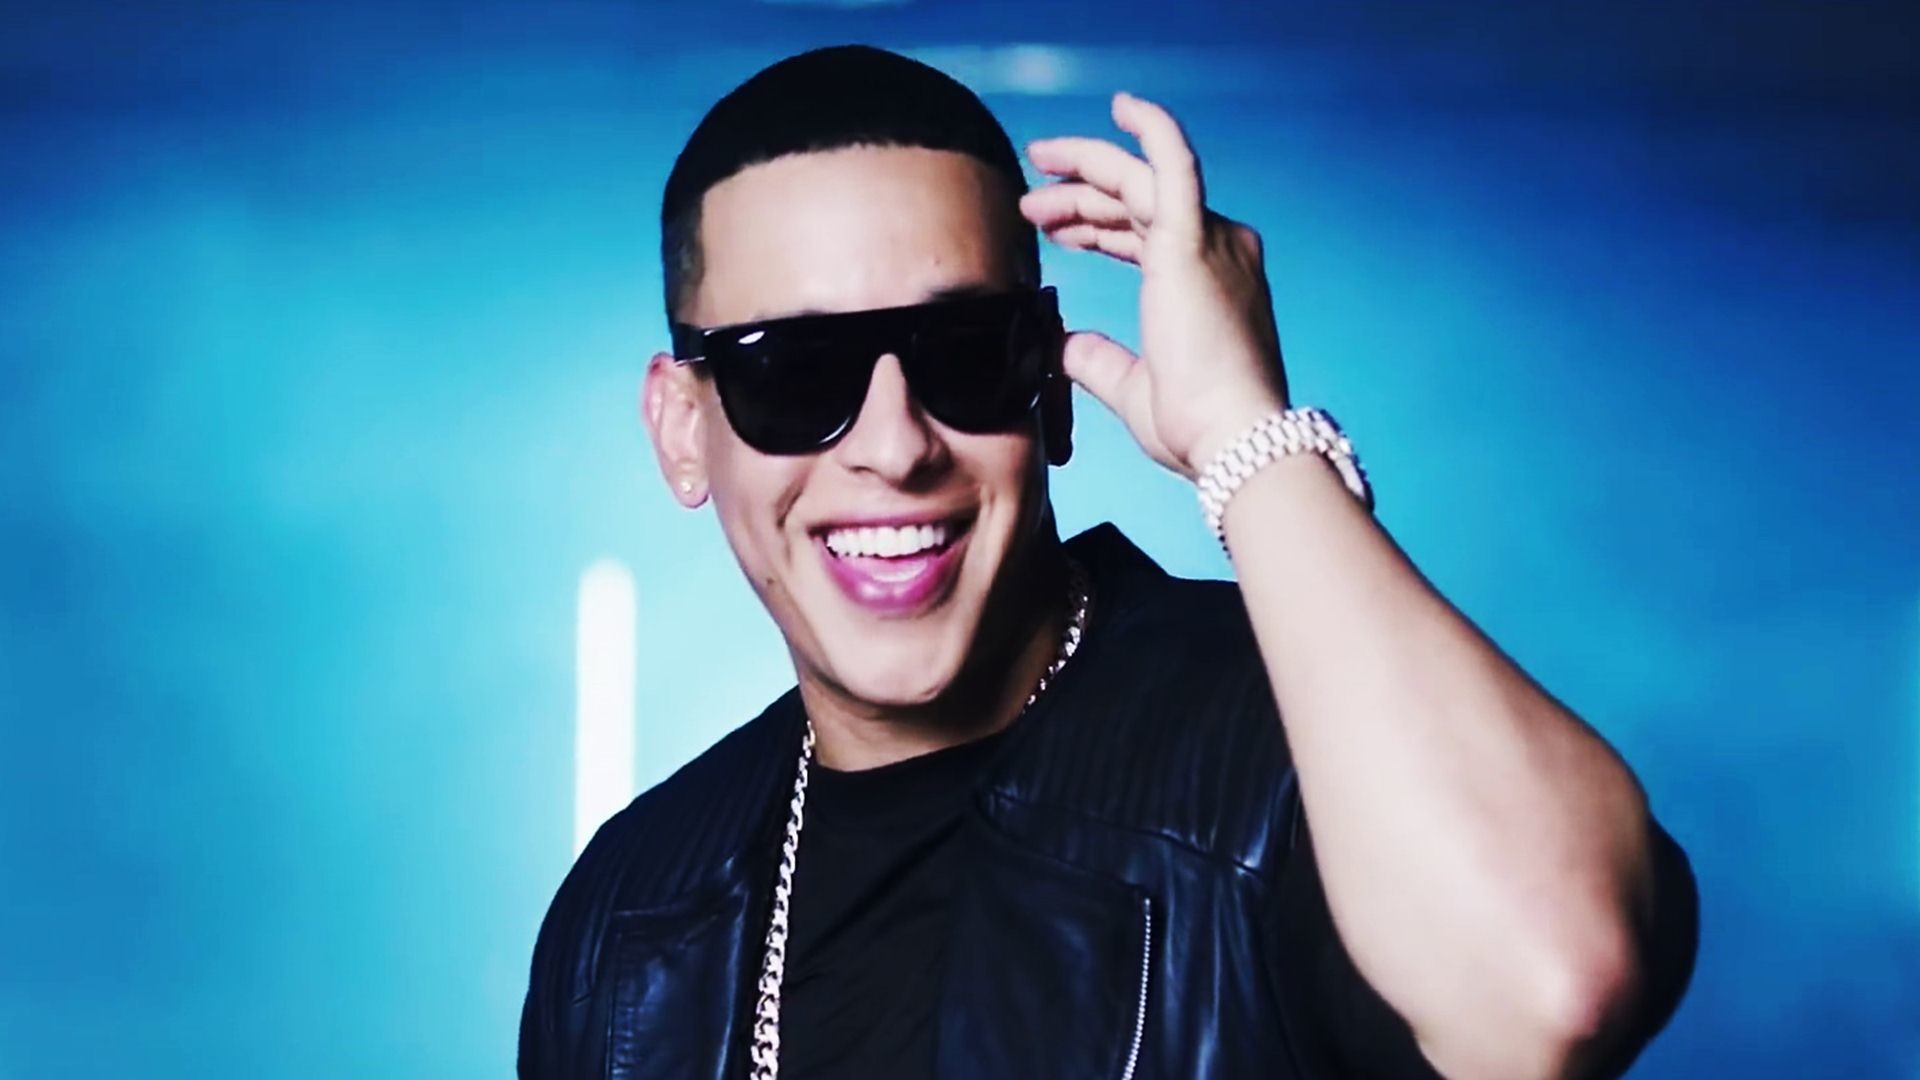 1920x1080 Daddy Yankee Wallpapers HD Backgrounds, Images, Pics, Photos Free | Best  Games Wallpapers | Pinterest | Daddy yankee, Wallpaper and Hd wallpaper